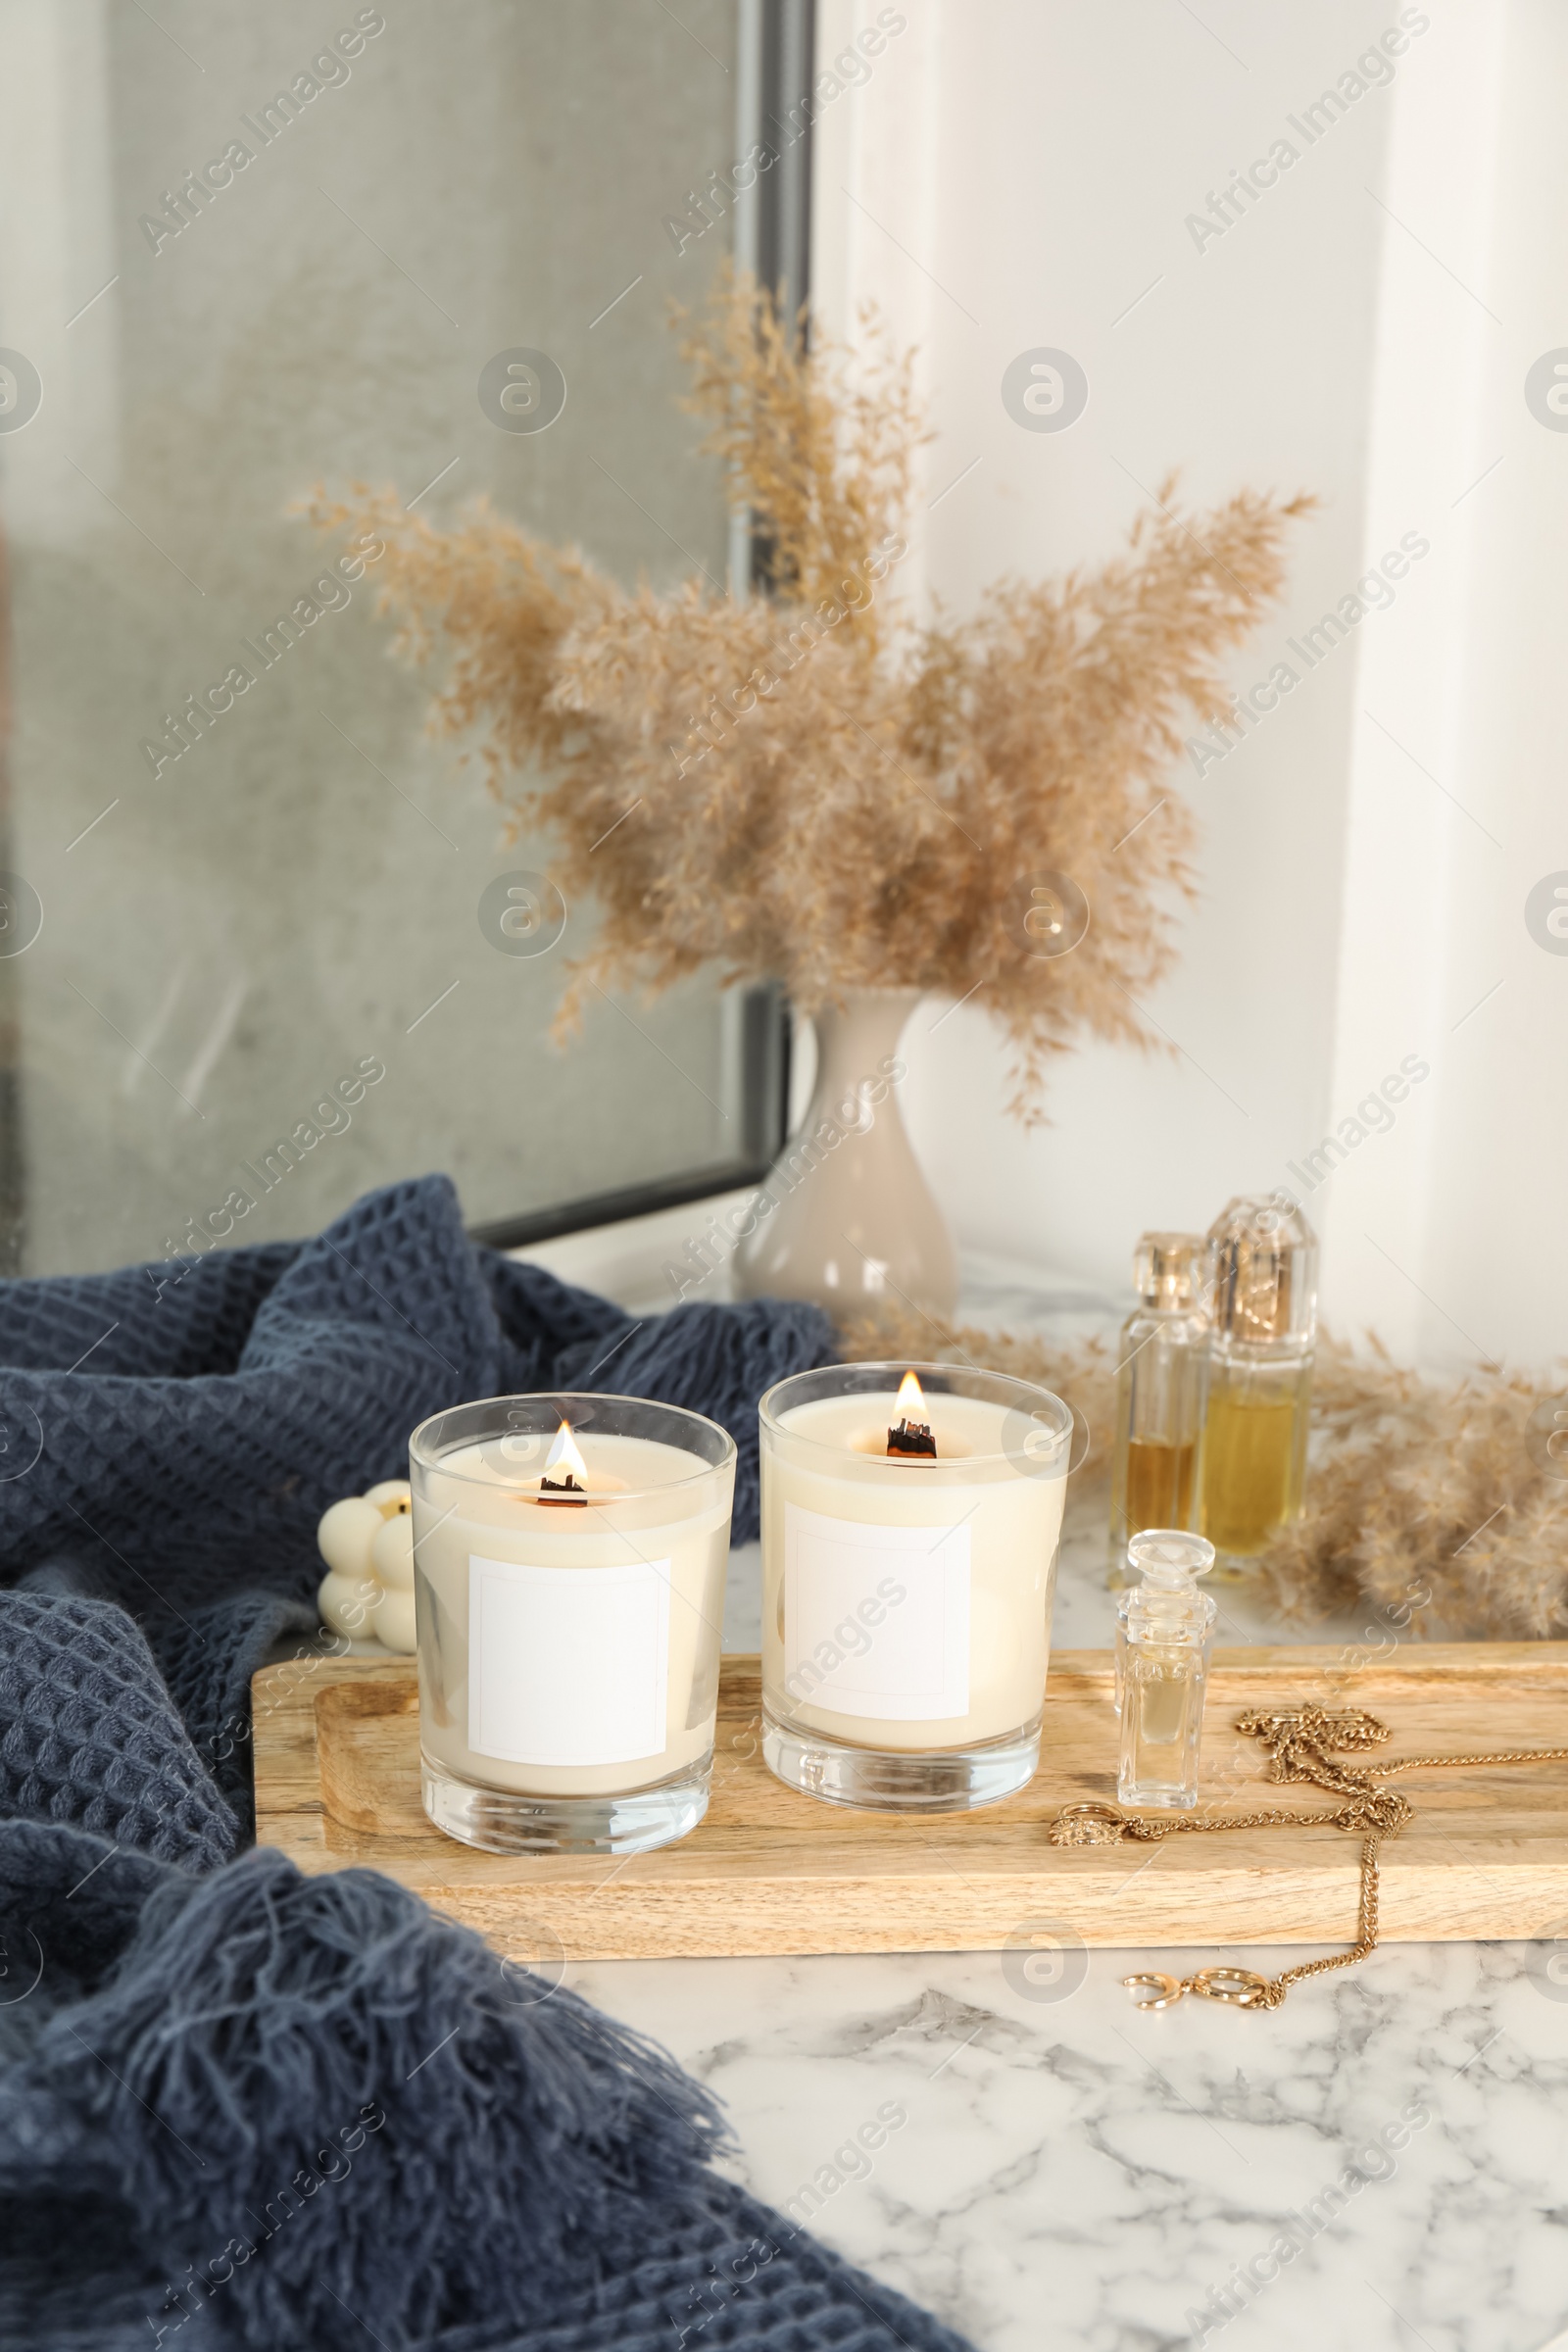 Photo of Burning soy candles, perfumes, blanket and stylish accessories on white window sill indoors